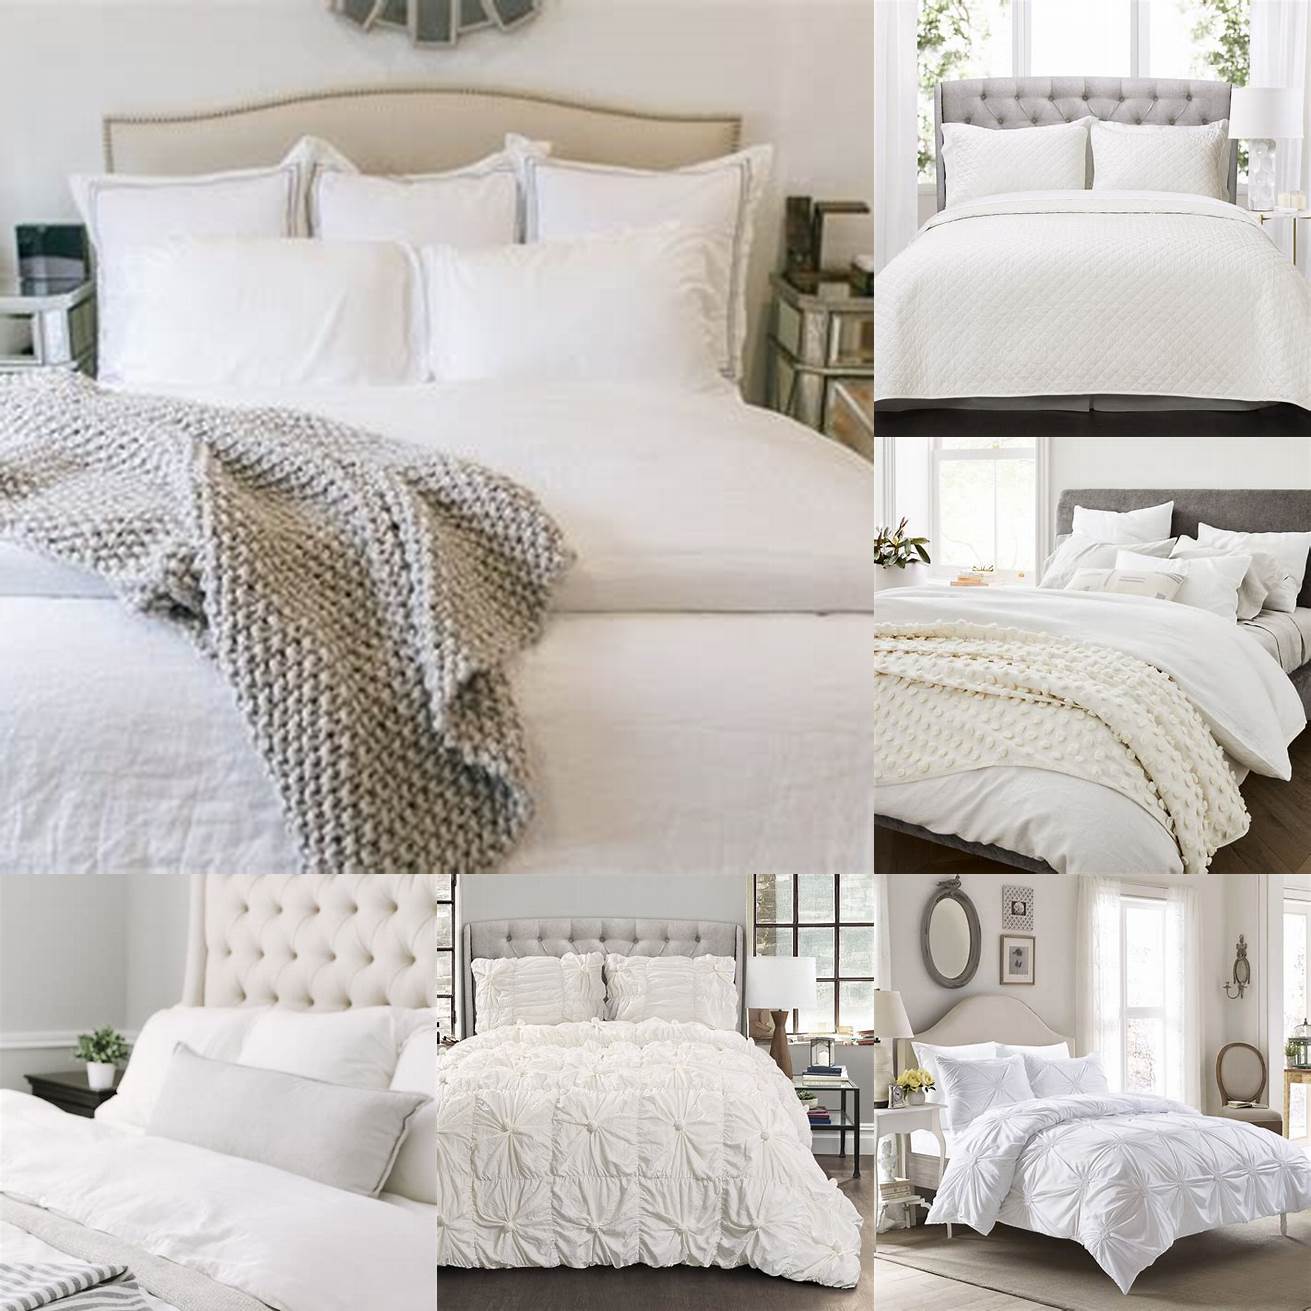 Minimalist bed with white bedding and a textured throw blanket